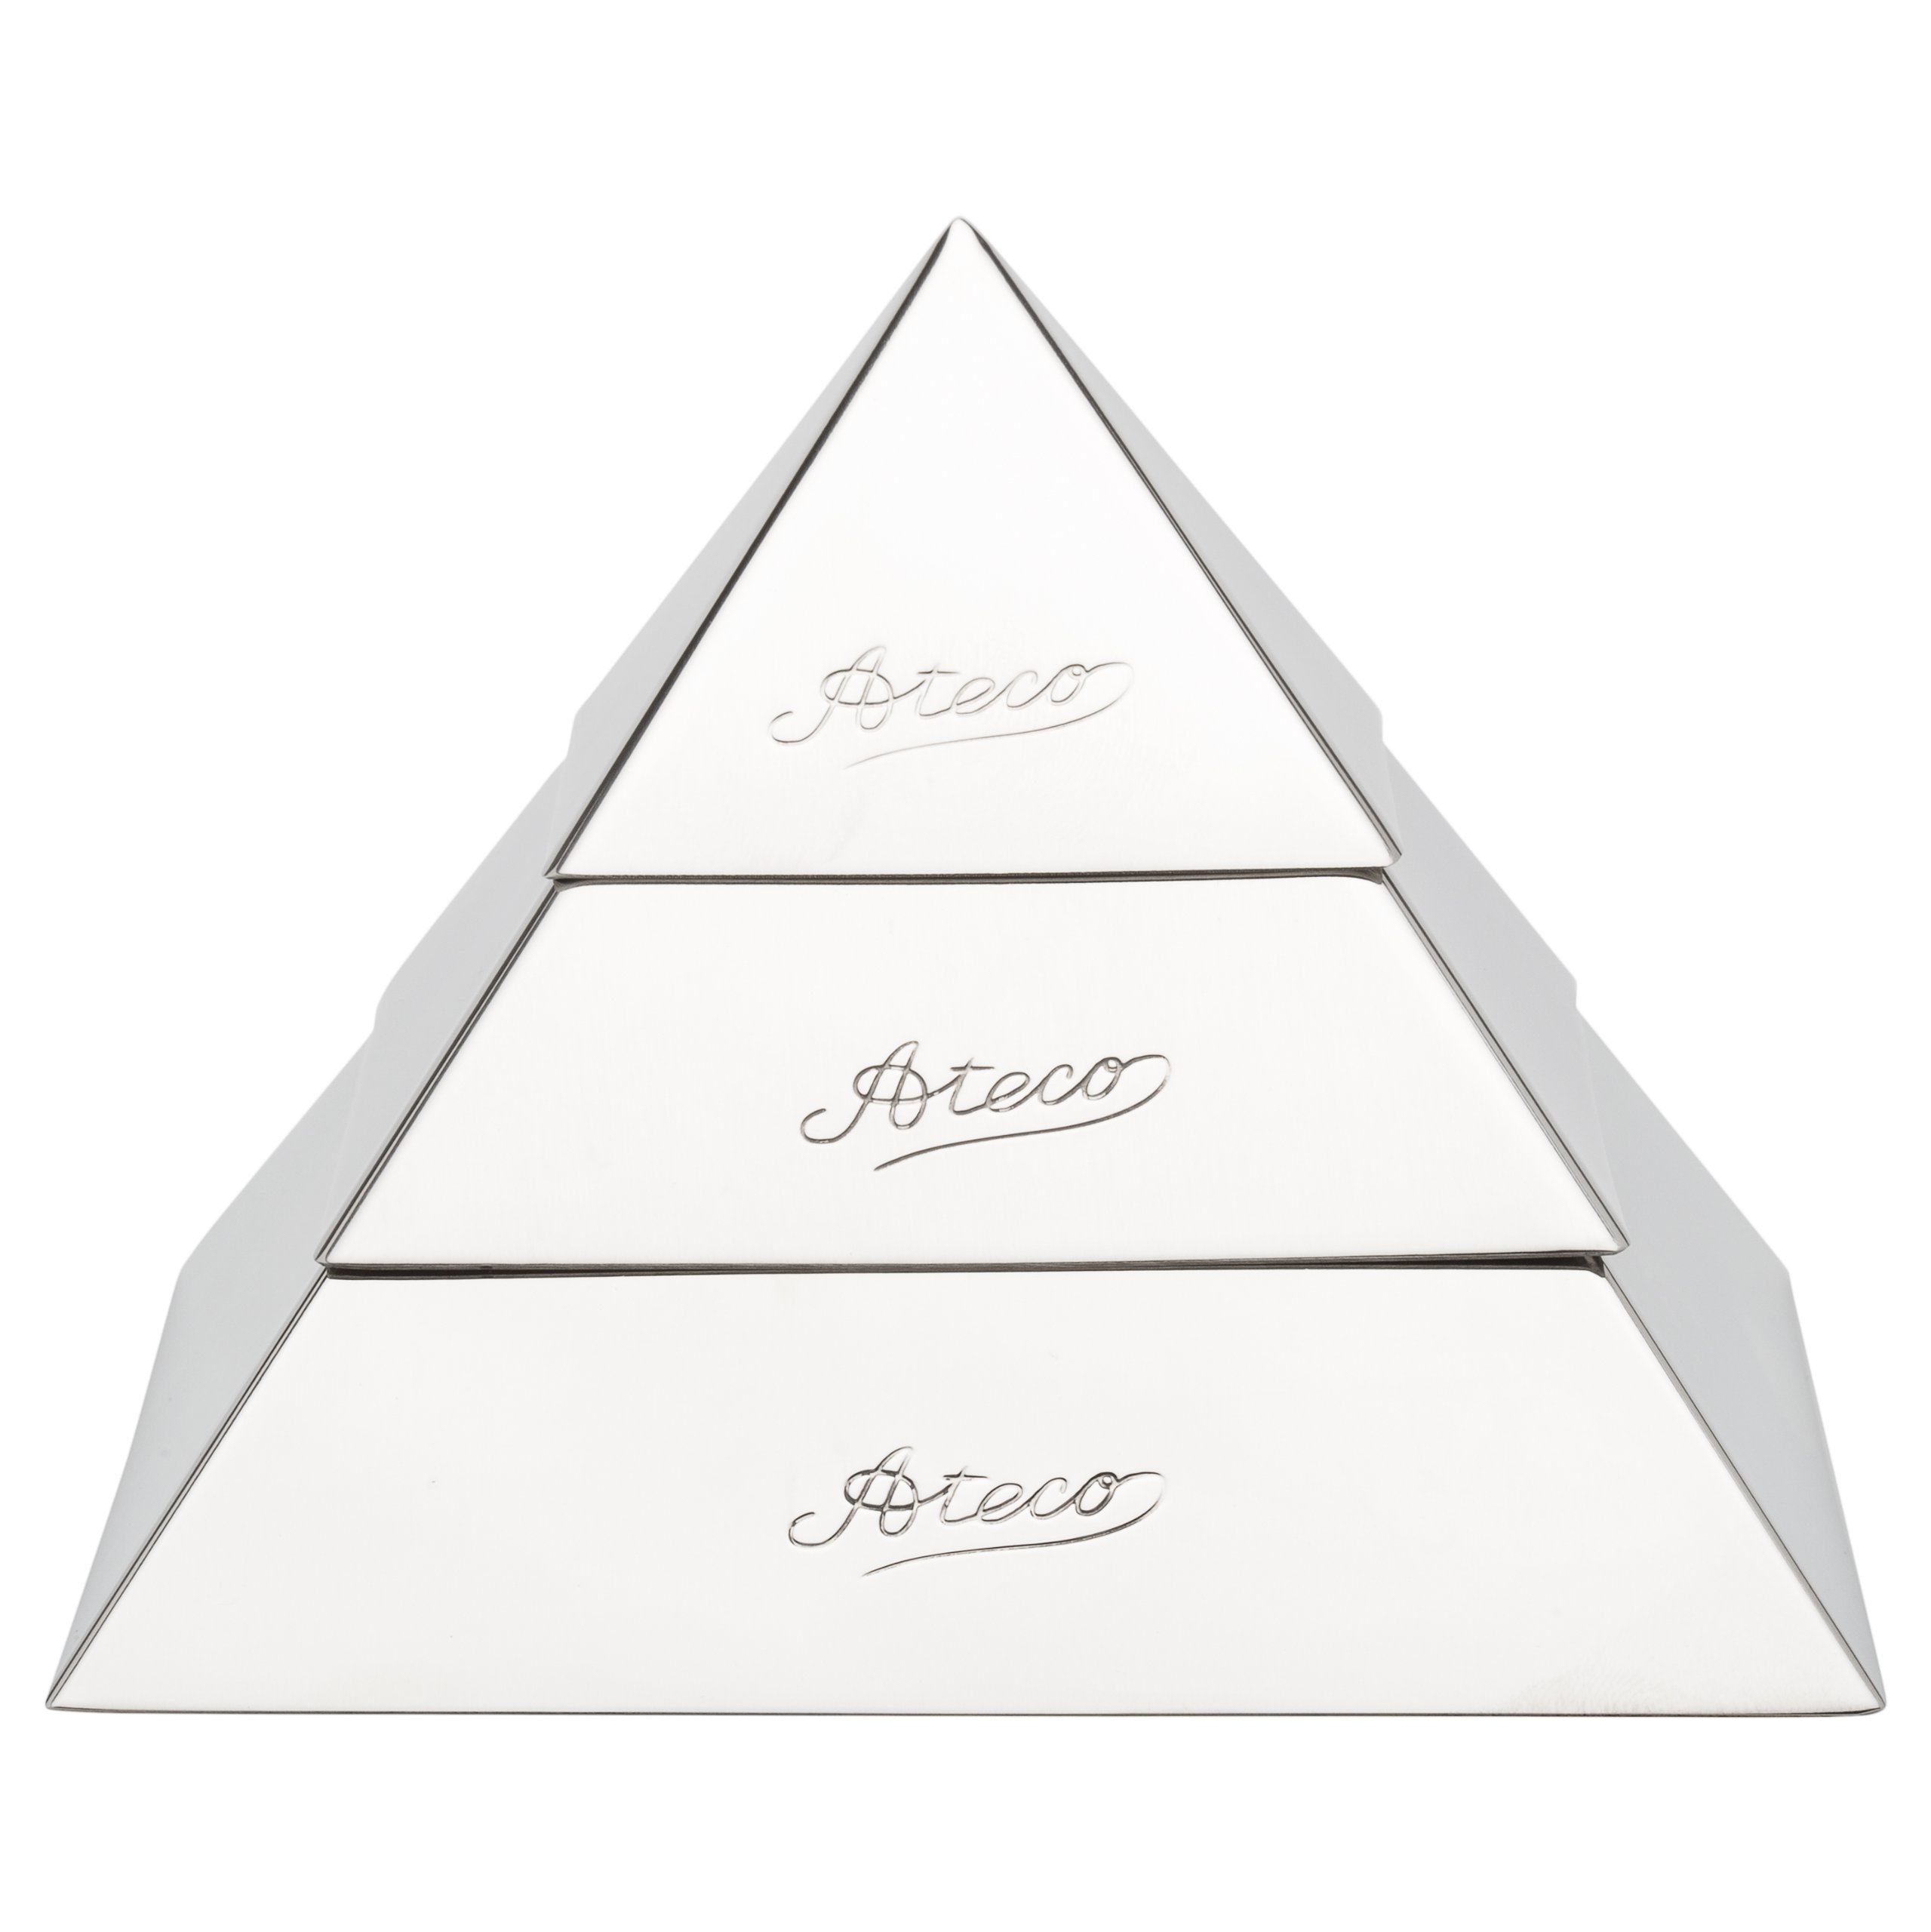 Ateco Stainless Steel Medium Pyramid Mold, 3.5 by 2.5-Inches High,Silver